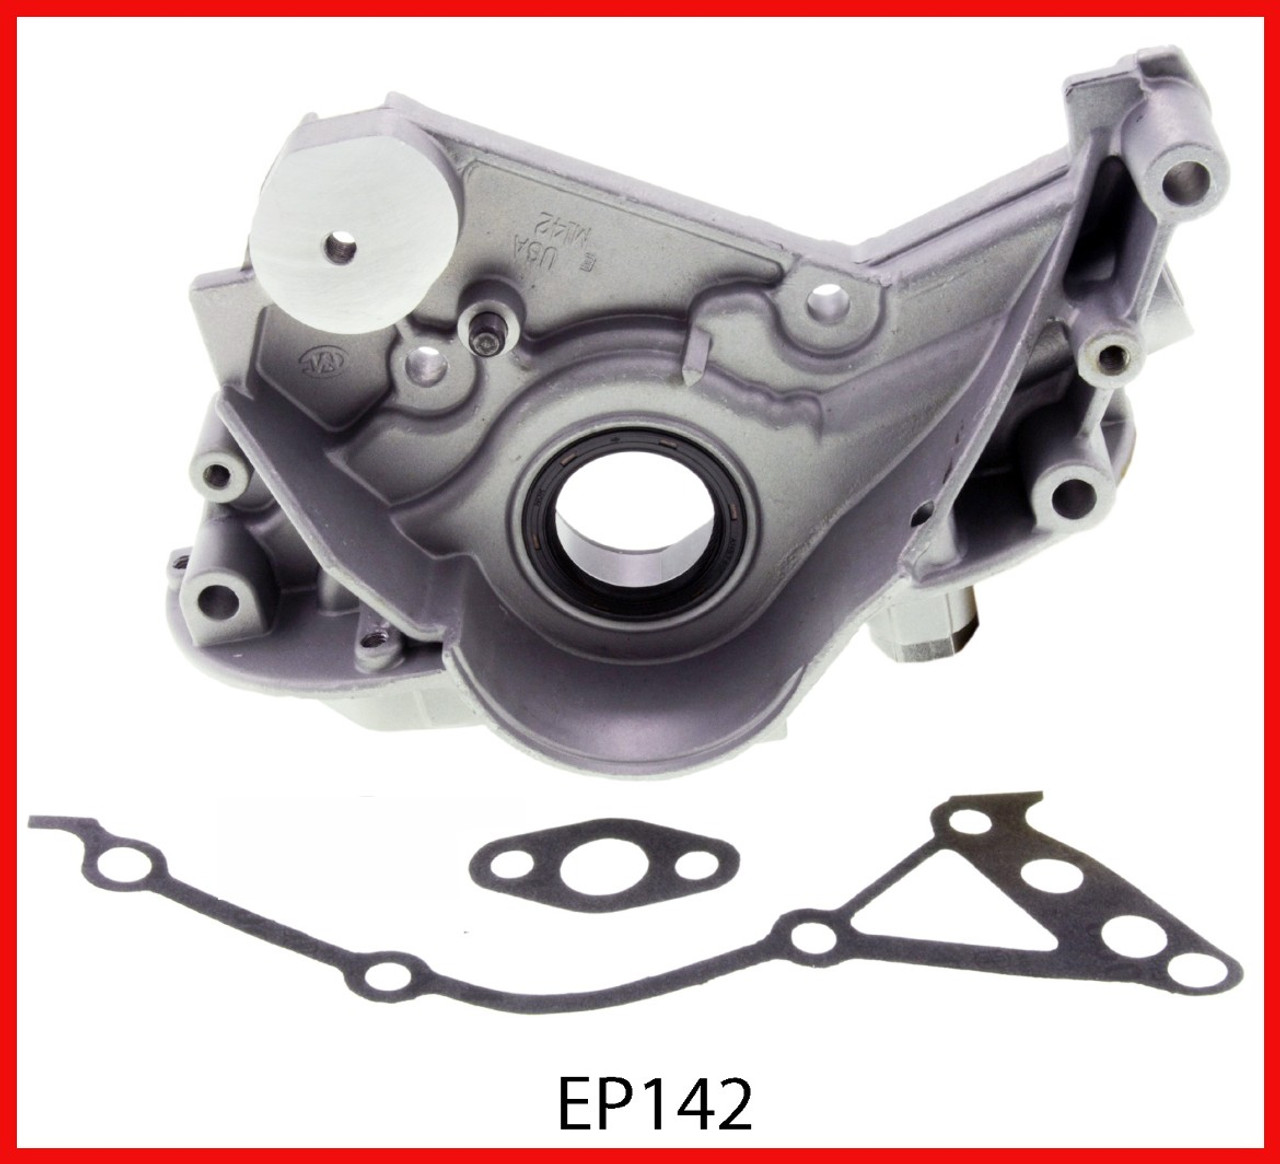 1991 Plymouth Acclaim 3.0L Engine Oil Pump EP142 -35